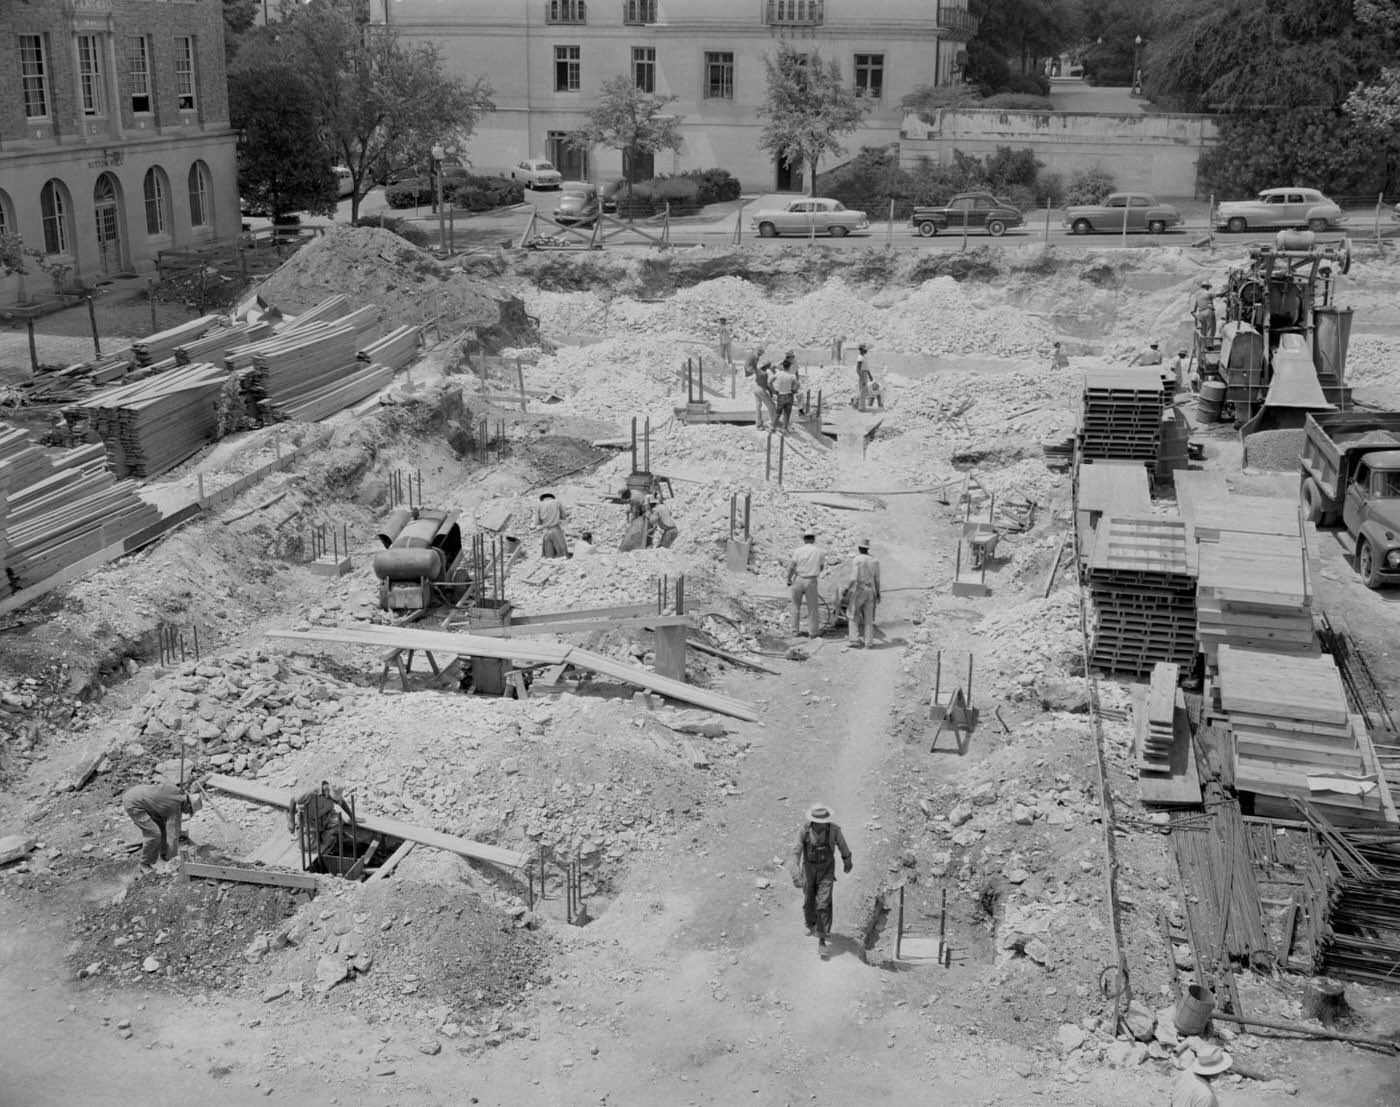 Construction Work at the University of Texas Campus, 1954.